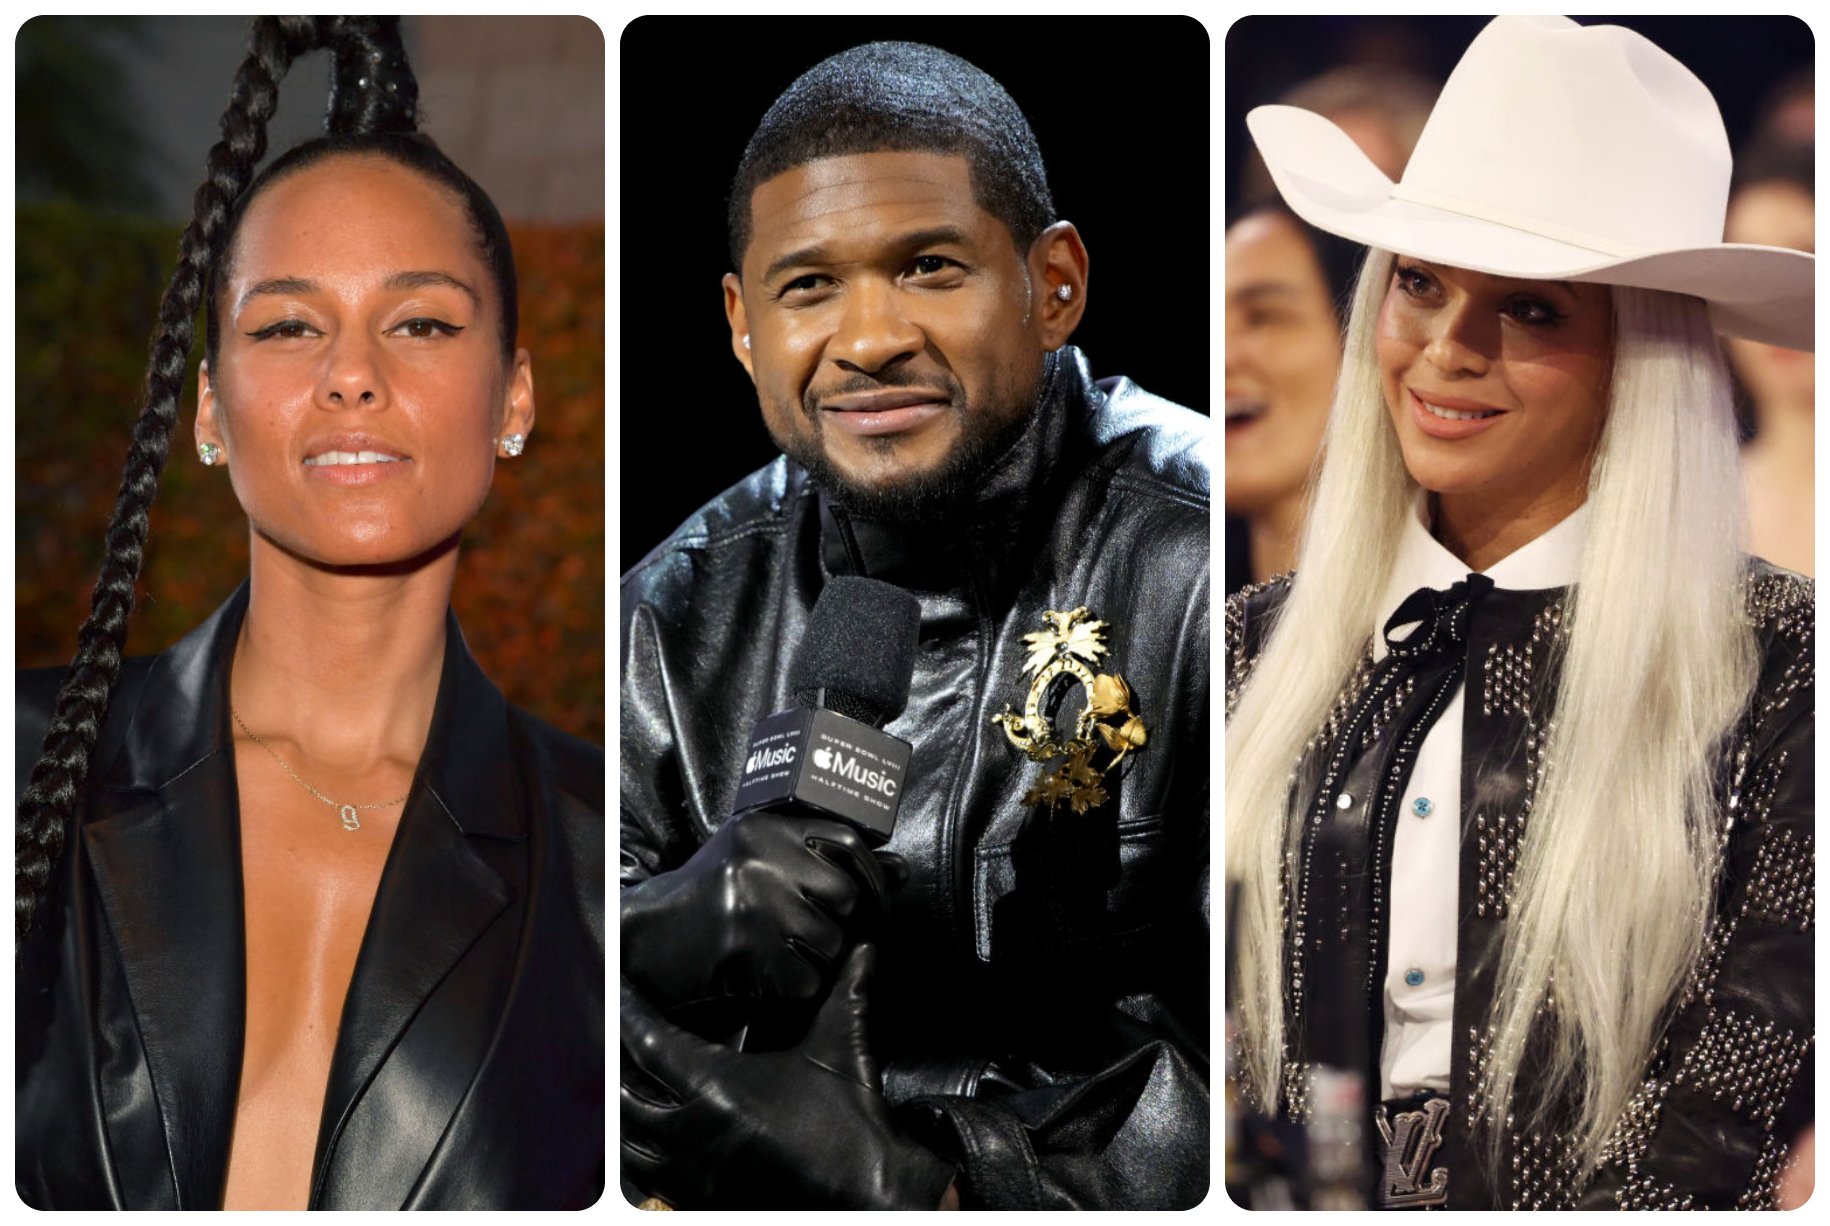 Alicia Keys Will Join Usher For The Super Bowl Halftime Show & The BeyHive Thinks Beyoncé Will Be Brought Out Too